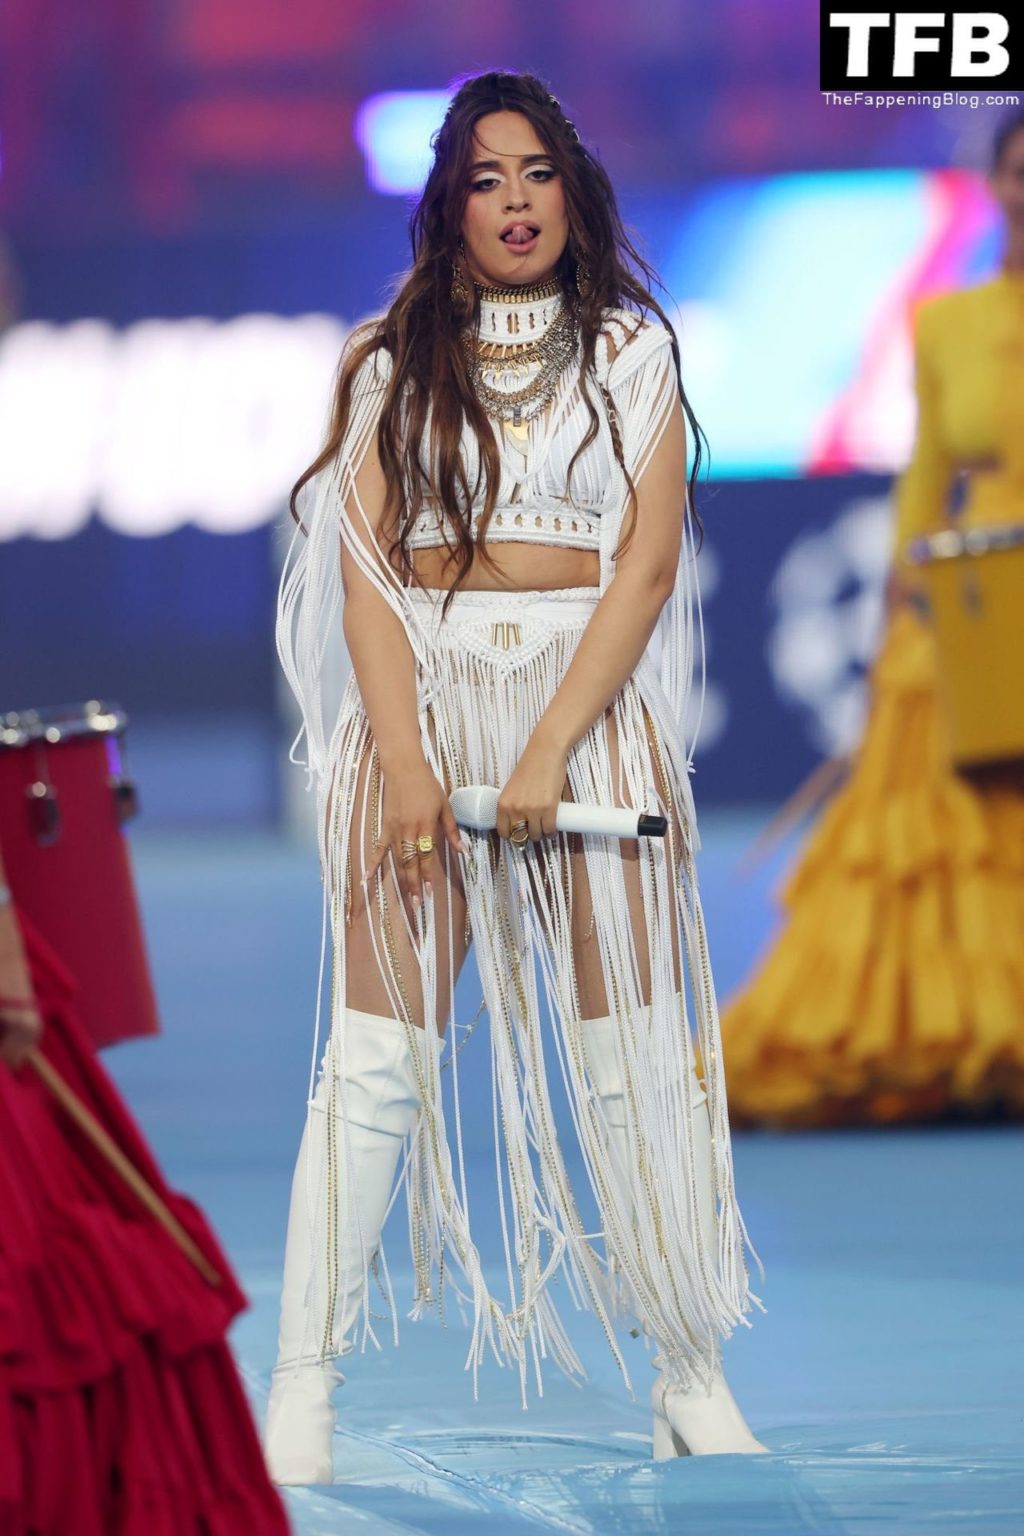 Camila Cabello Flaunts Her Curves as She Performs at the Champions League Final Opening Ceremony (60 Photos)